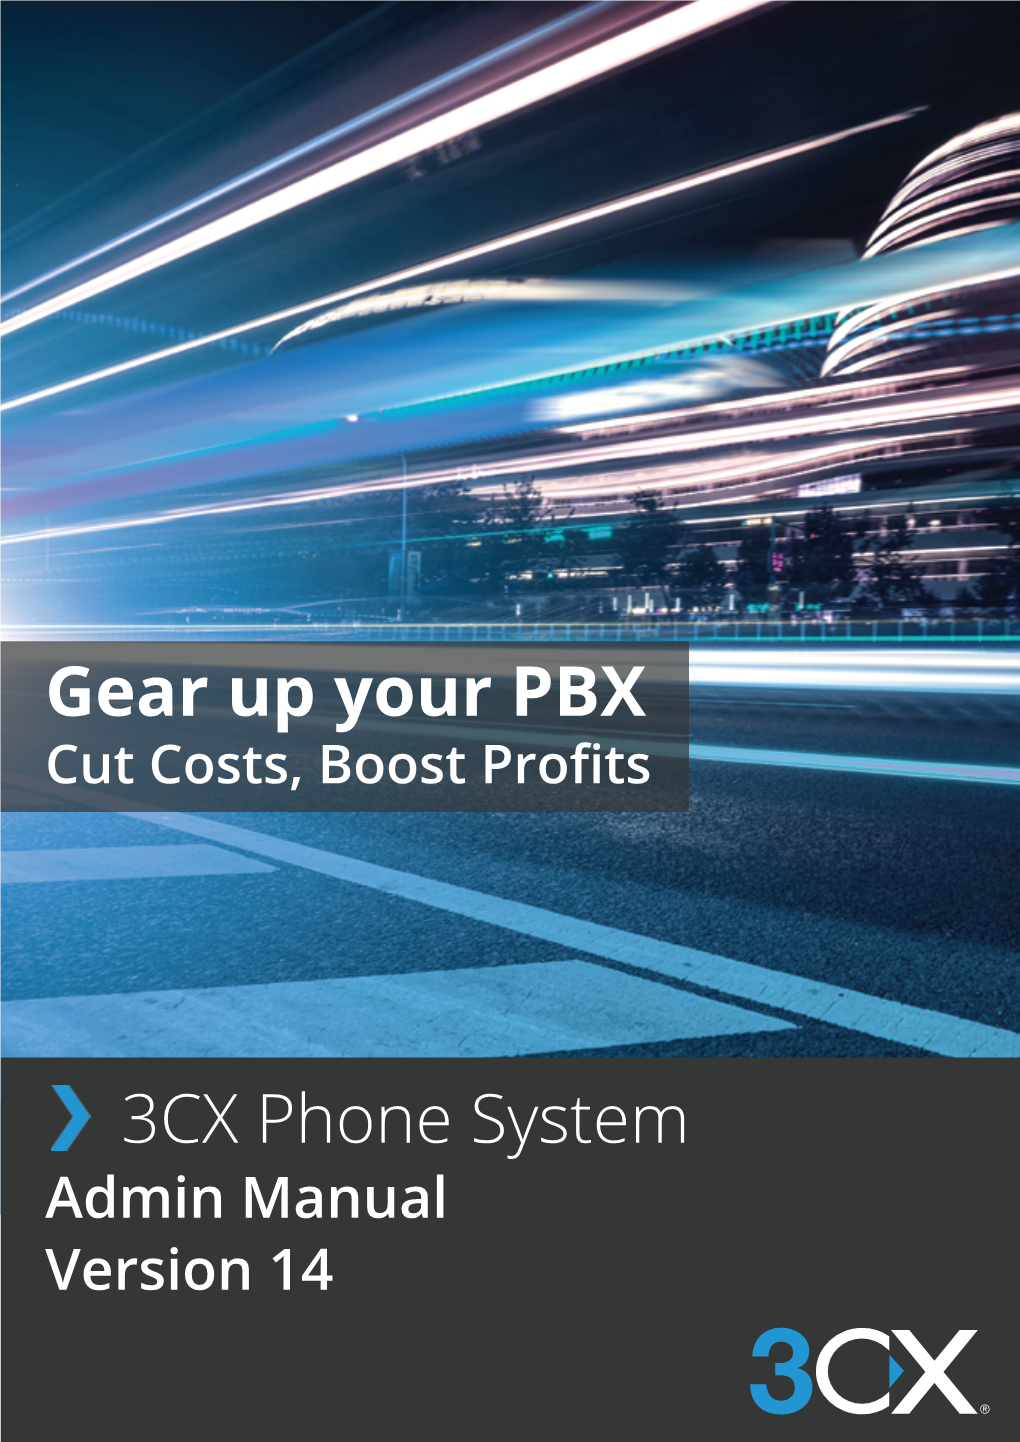 Gear up Your PBX Cut Costs, Boost Proﬁts